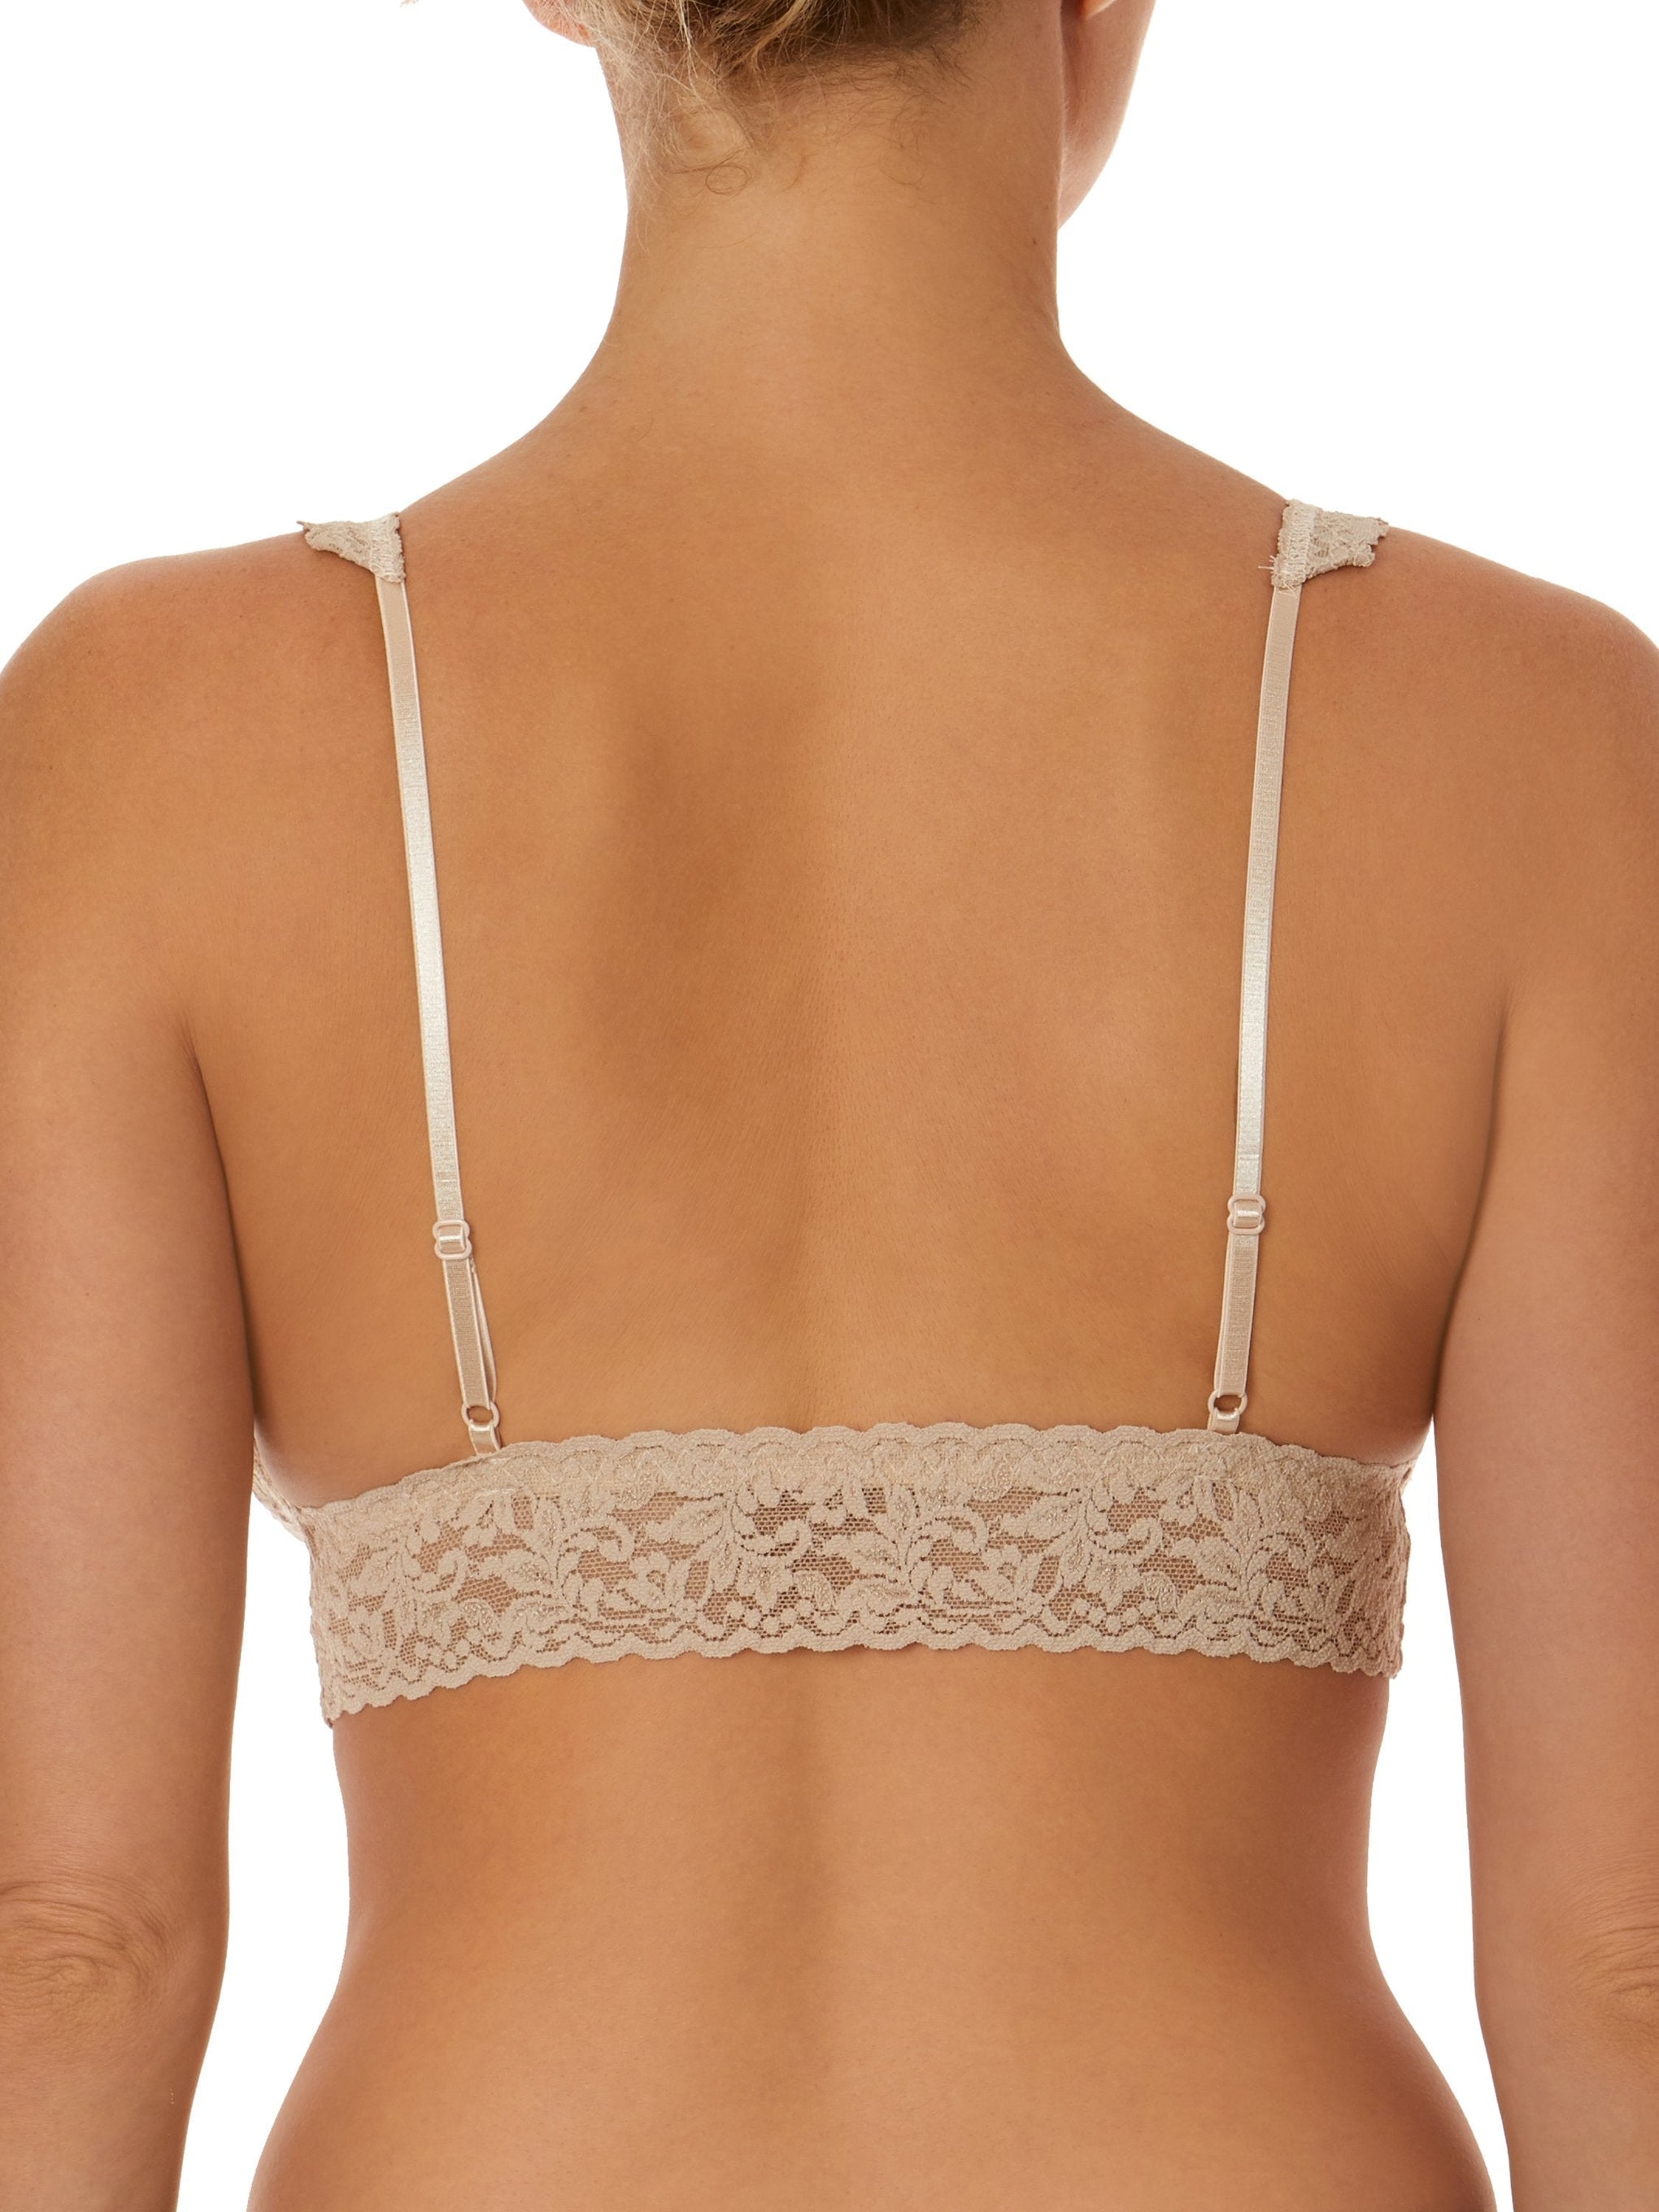 Hanky Panky Signature Lace Crossover Bralette CHAI buy for the